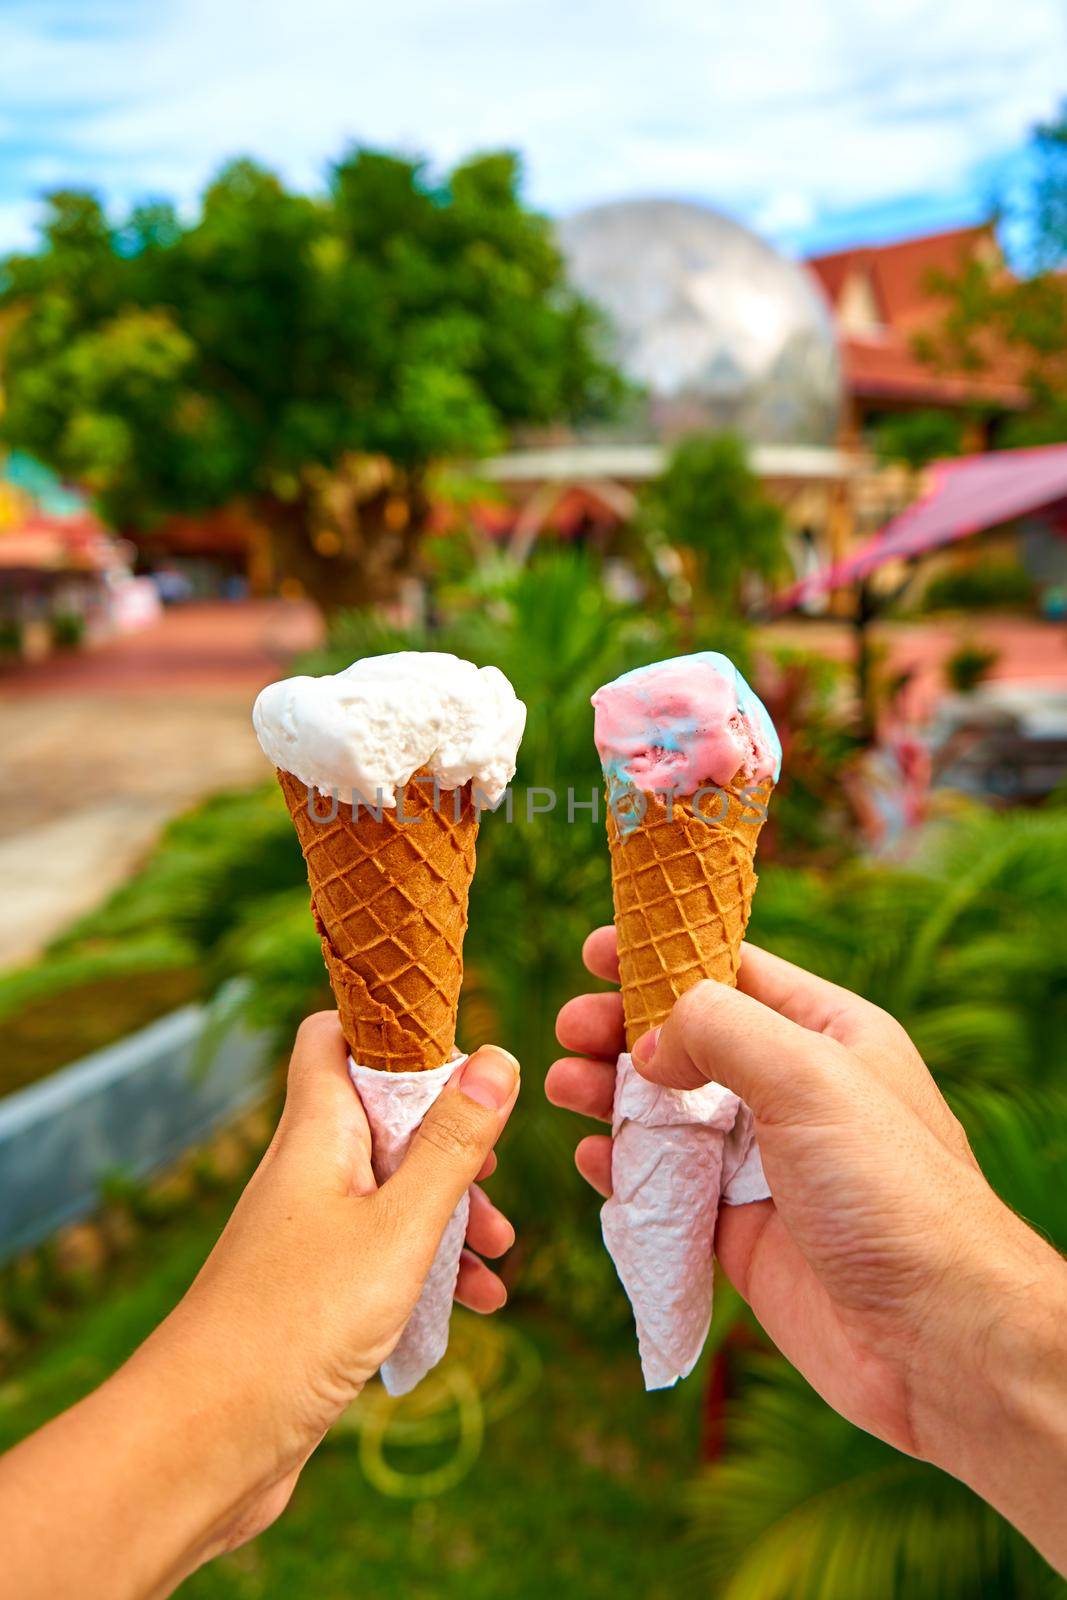 A couple takes pictures of ice cream cones in their hands.